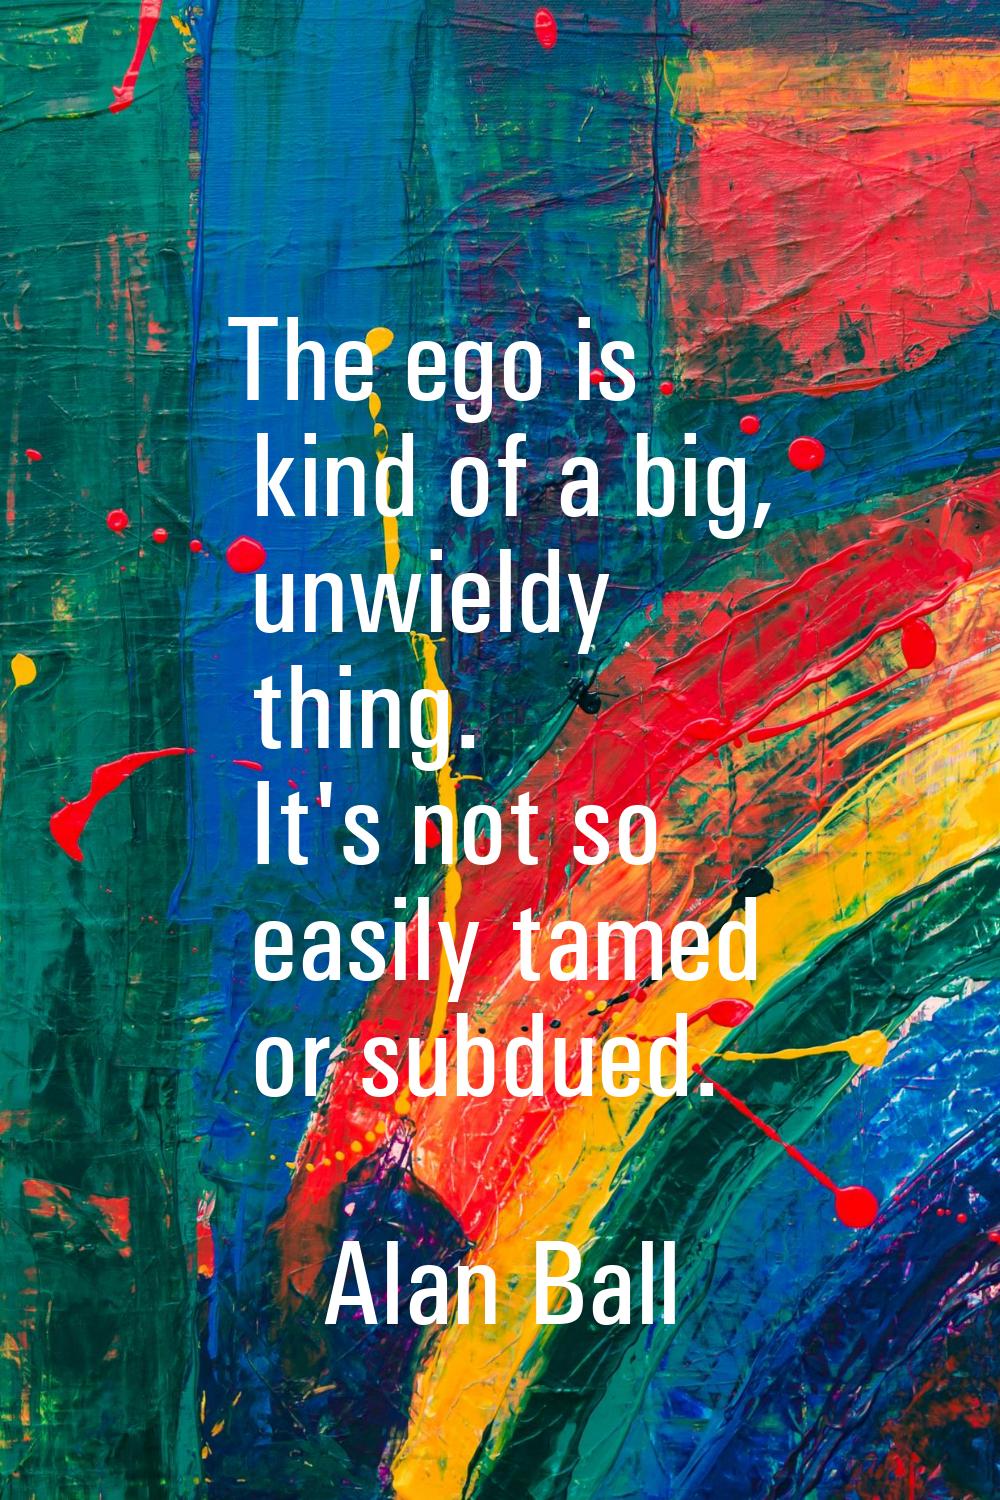 The ego is kind of a big, unwieldy thing. It's not so easily tamed or subdued.